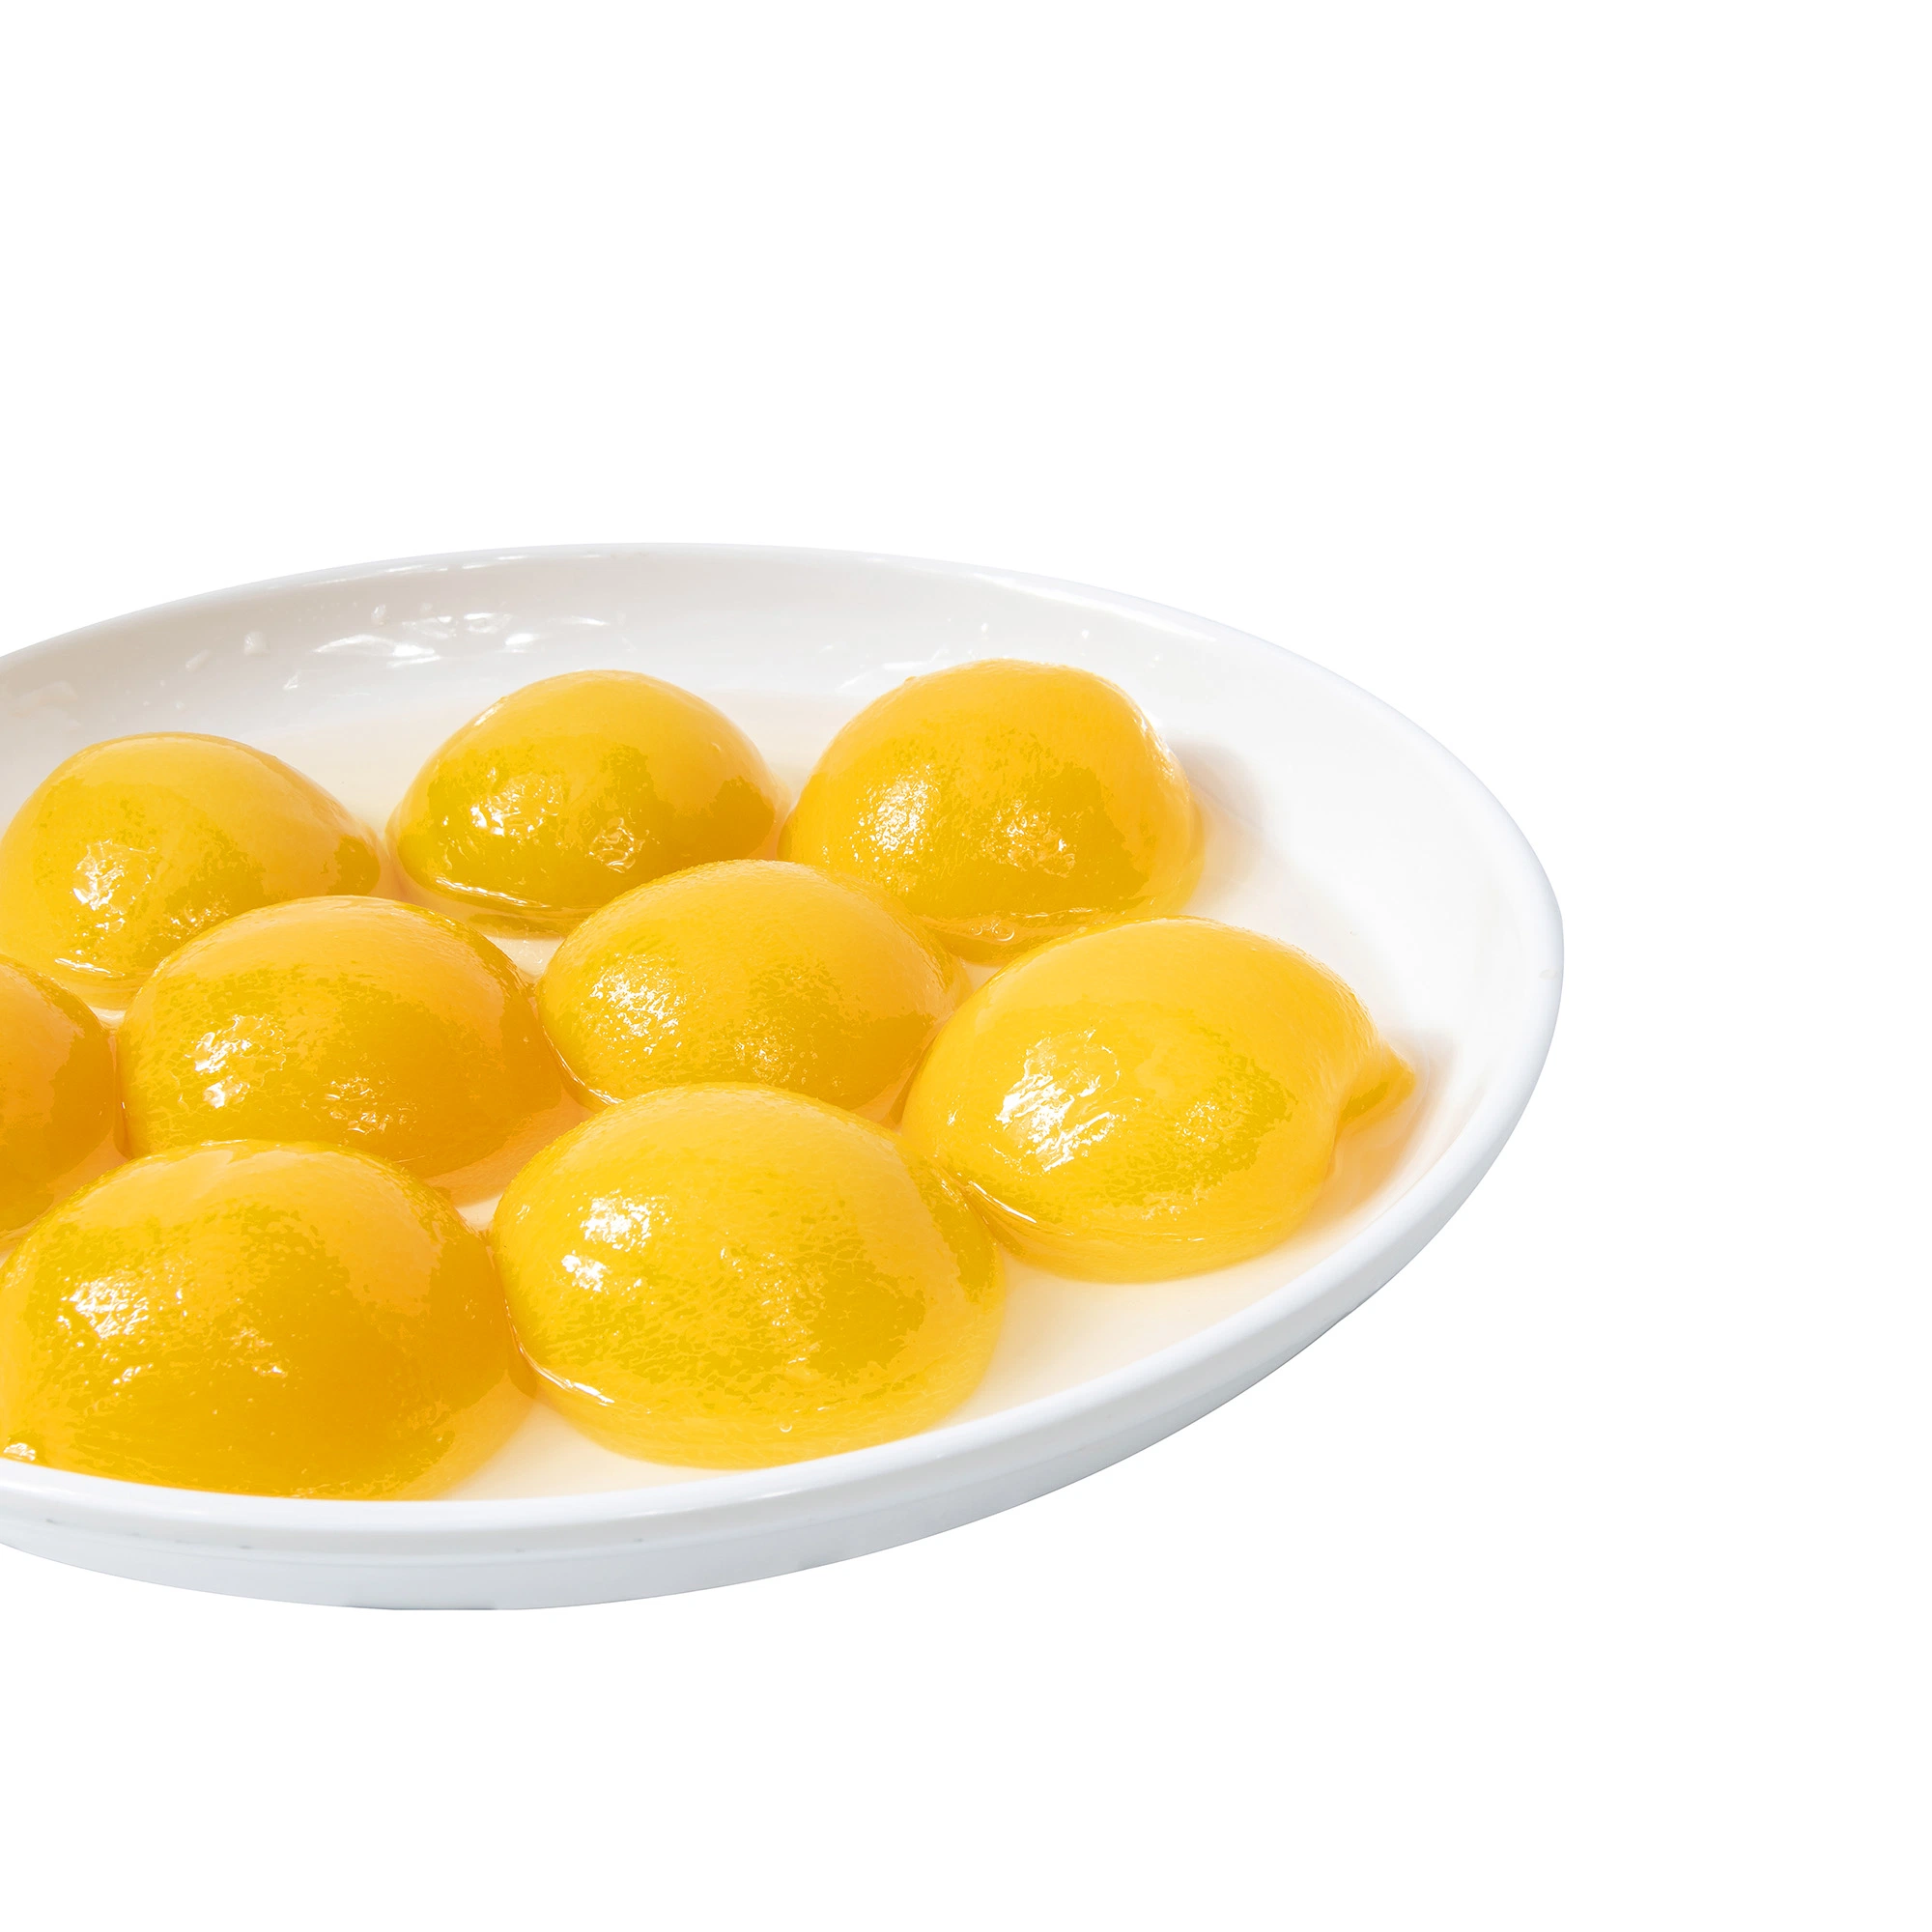 Health Food Canned Yellow Peach Halves/Slices/Dices in Syrup Factory Price